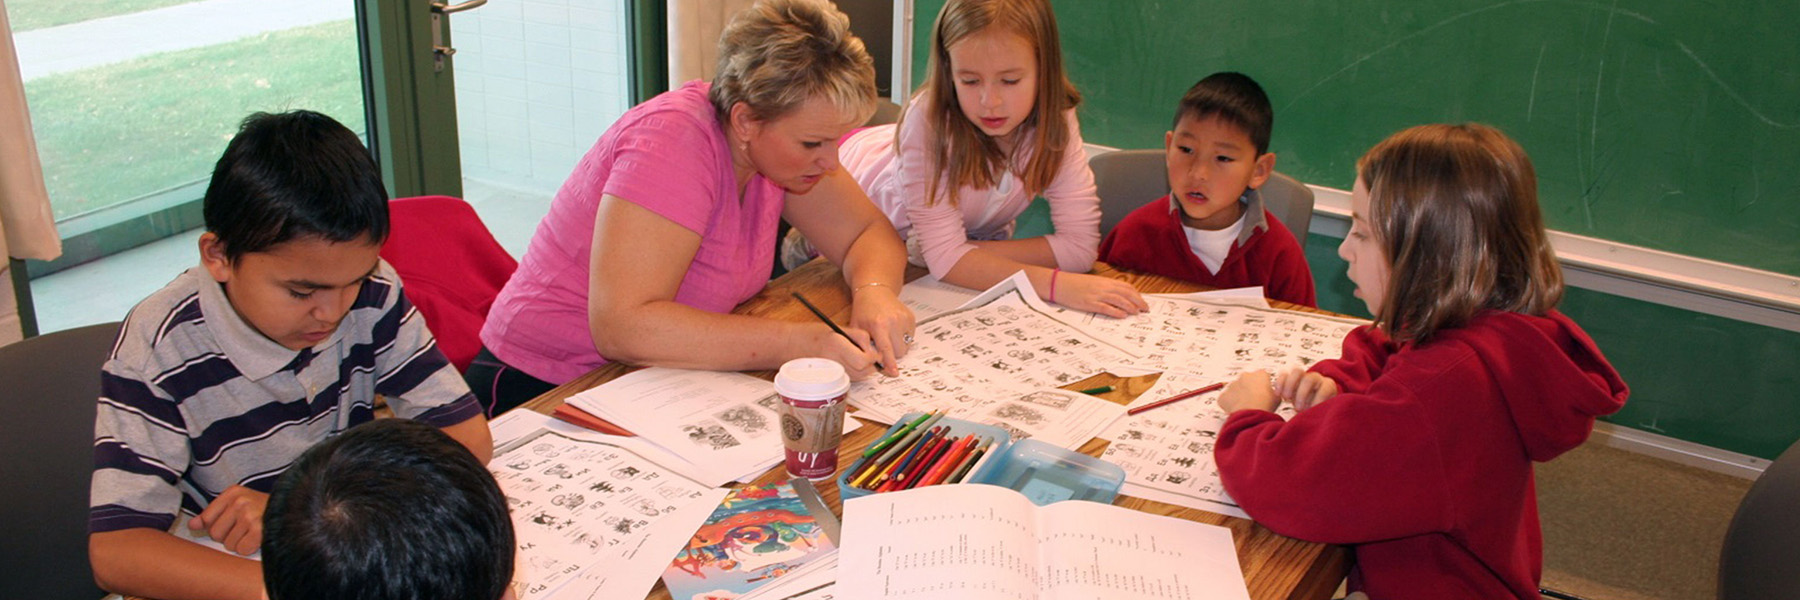 Teacher showing children coloring handouts in a classroom